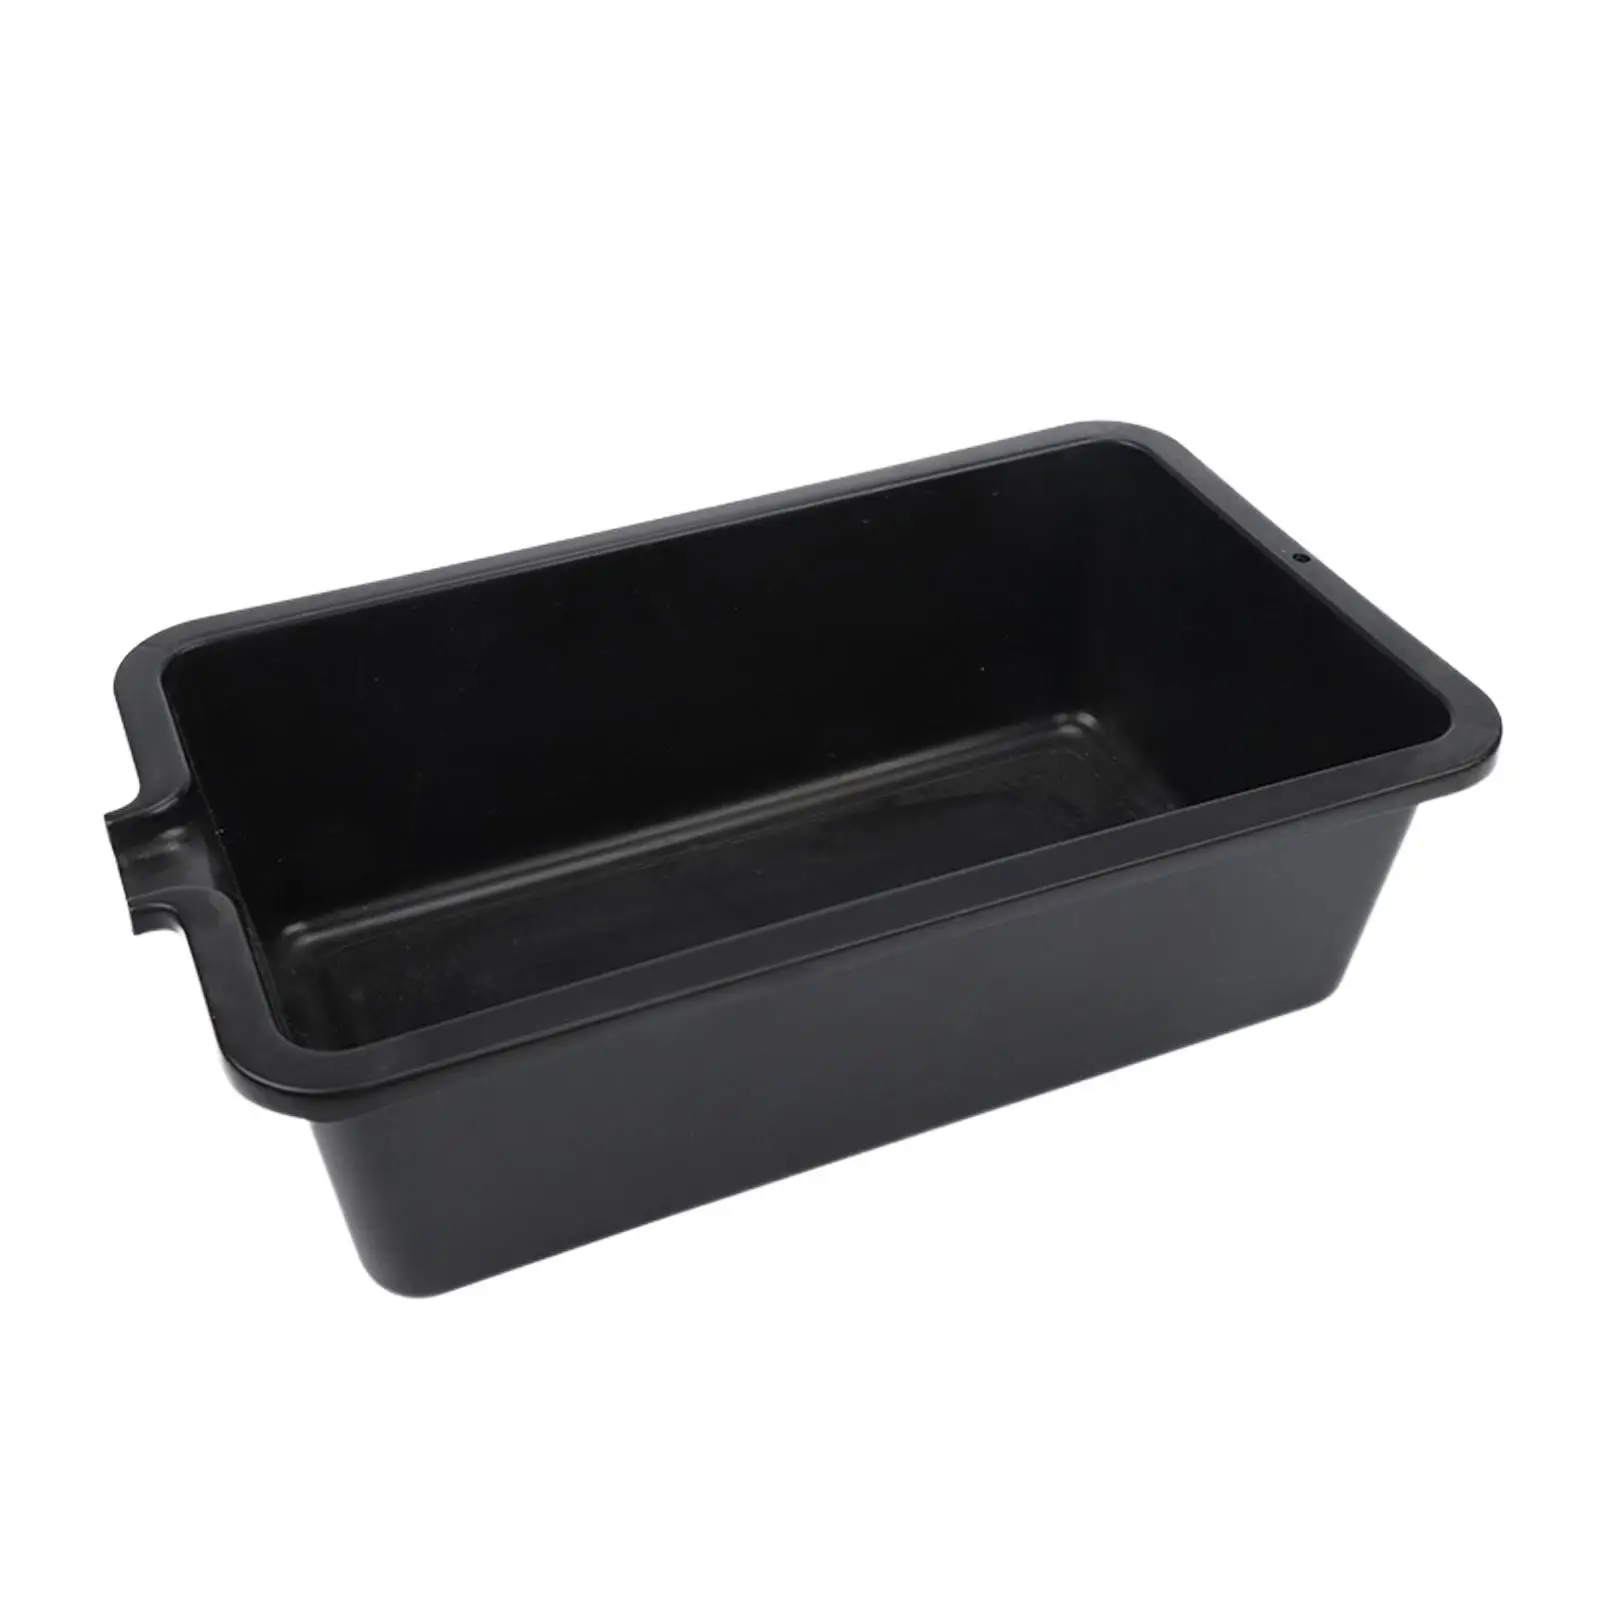 

Oil Drain Pan Rectangle Black Professional Sturdy Durable 6L High Performance Motor Oil Drip Catching Pan Automotive Accessories